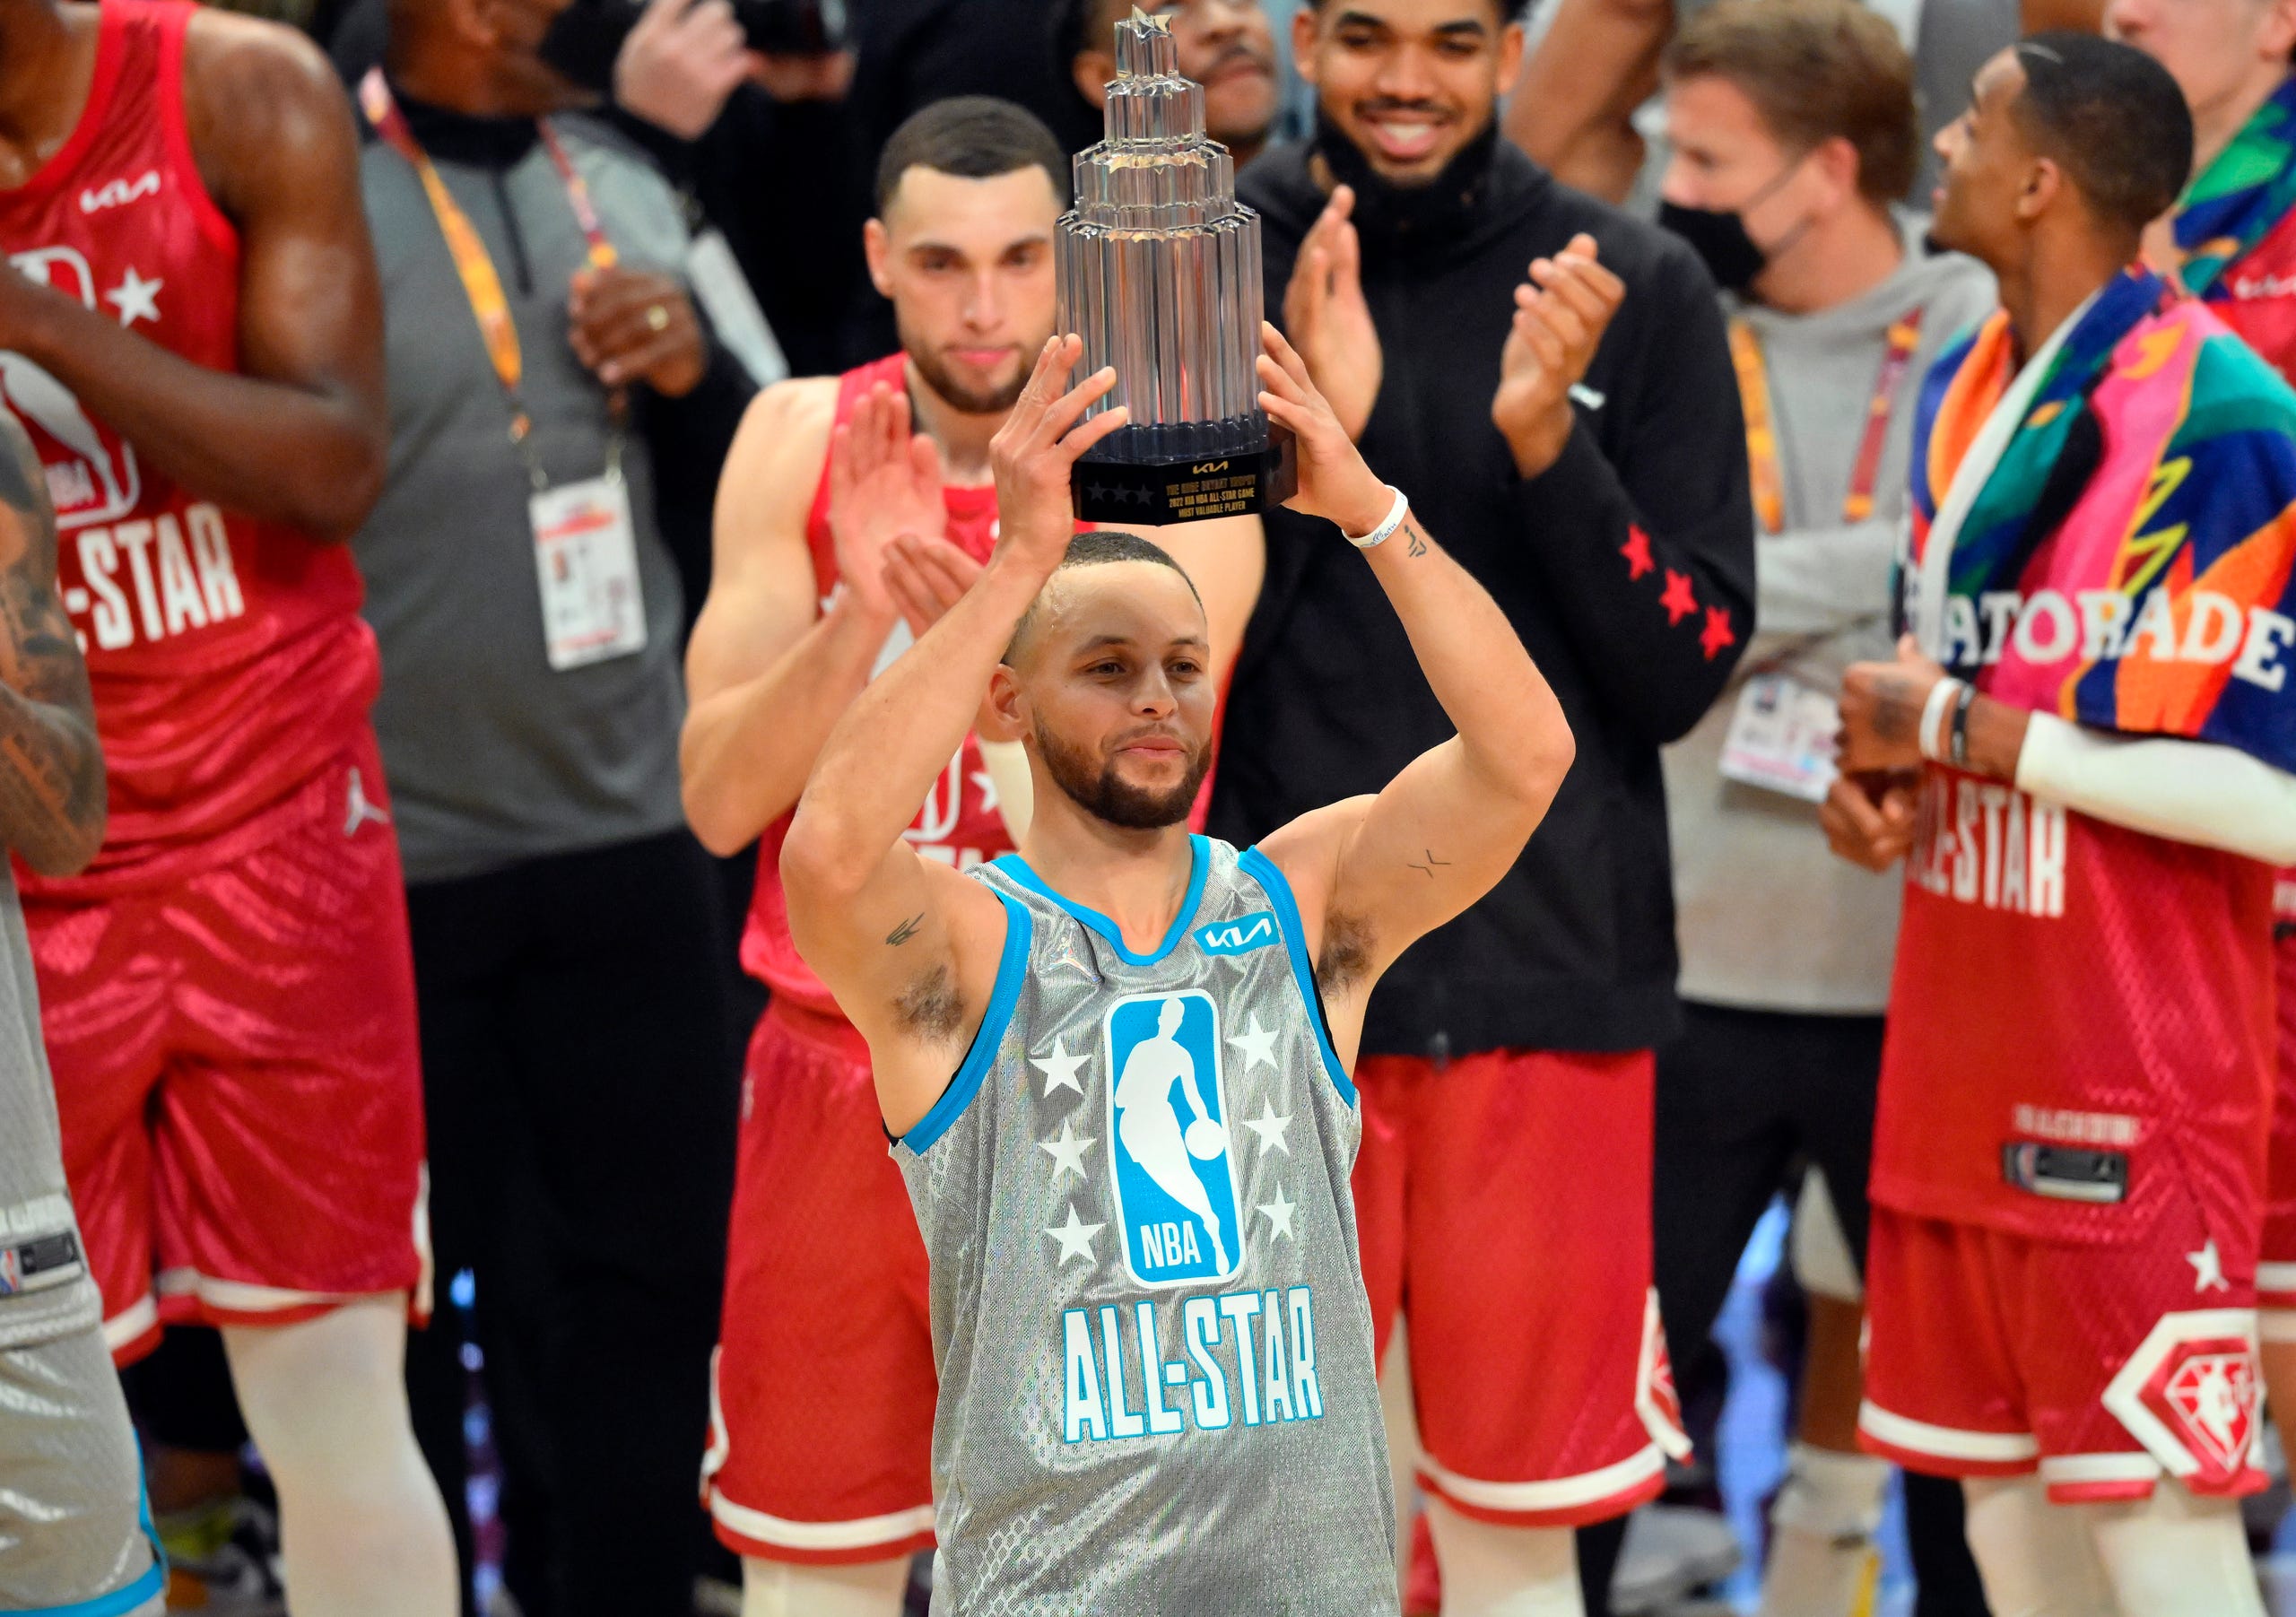 NBA All Star Weekend: Best Photo From The Festivities In Cleveland